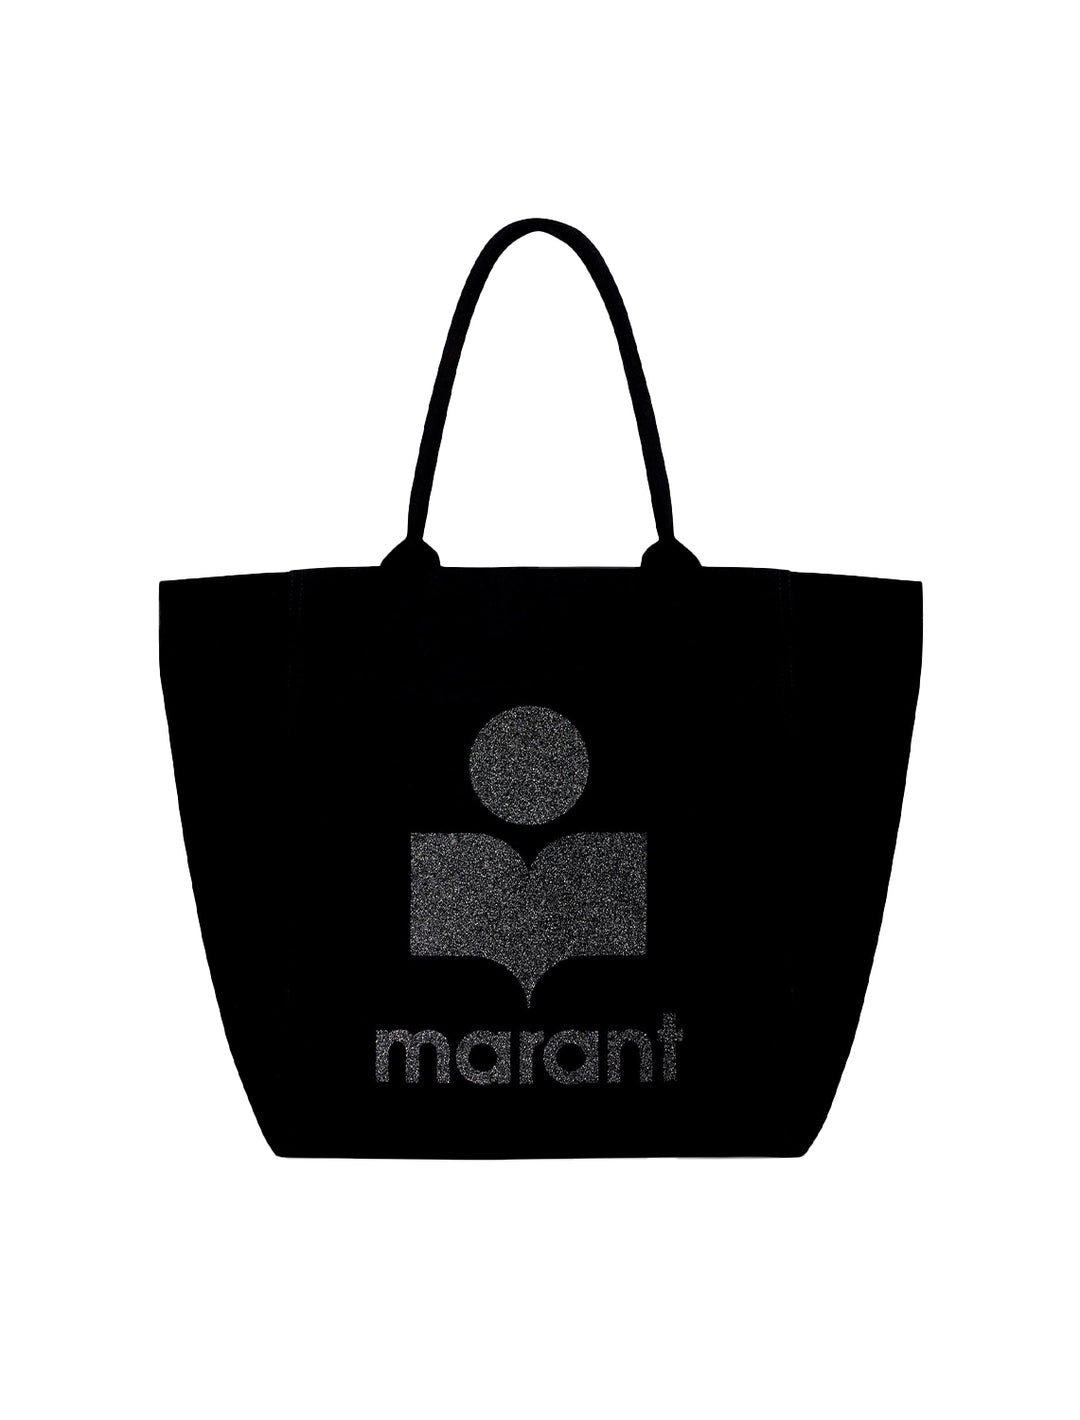 Front view of Isabel Marant Etoile's Yenky Canvas Tote in Black with Sparkle Logo.